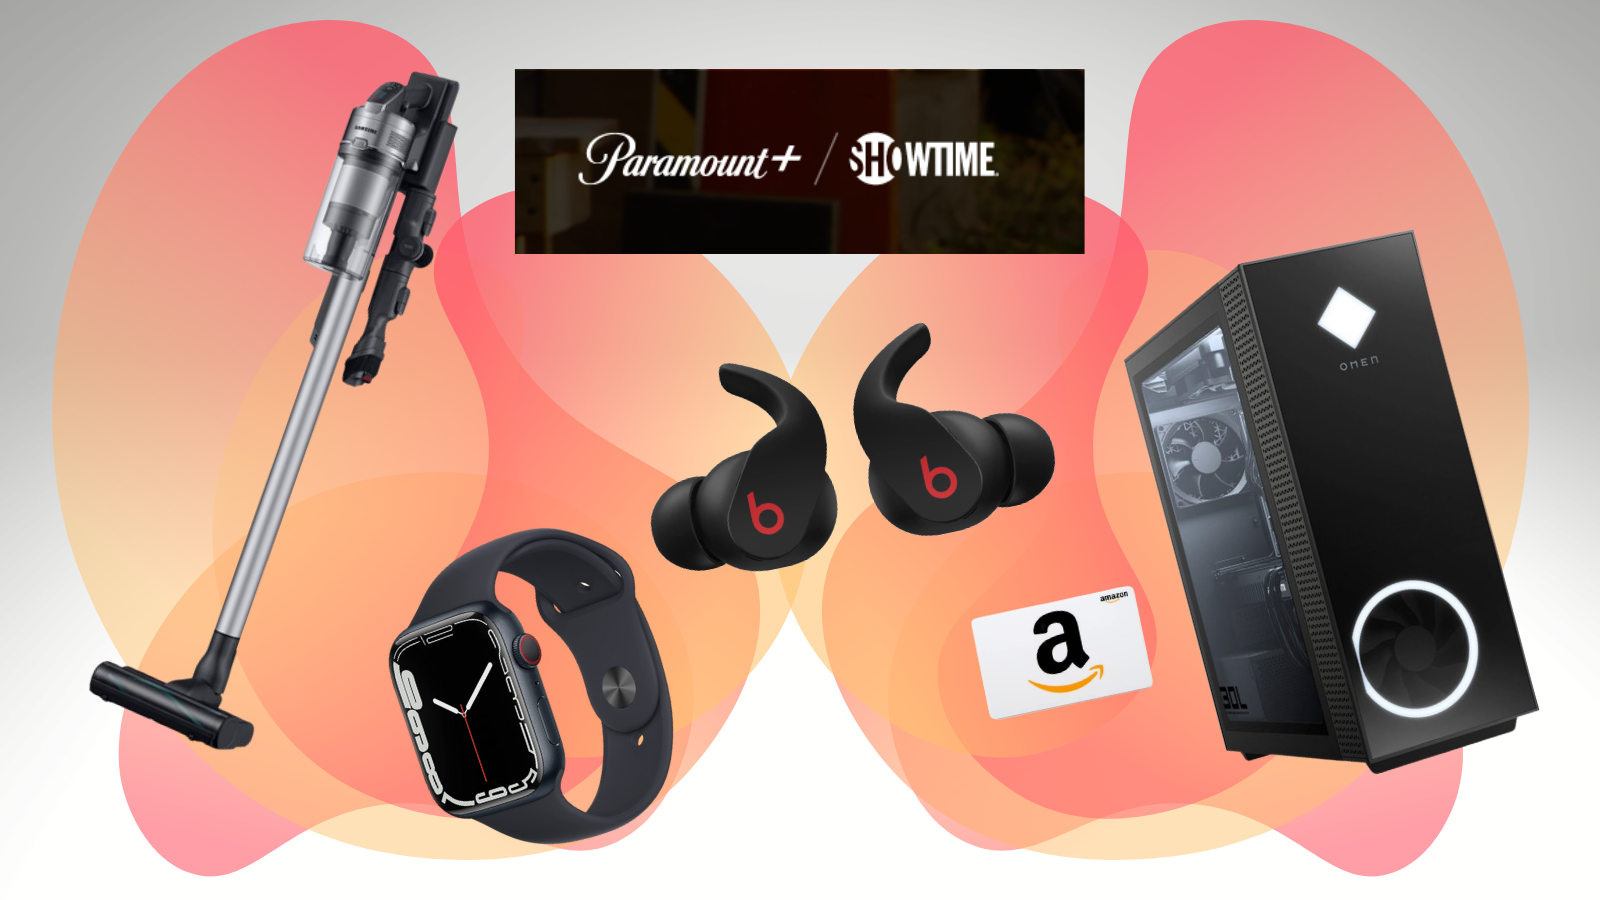 samsung vacuum, apple watch, beats earbuds, amazon gift card, hp computer tower, and paramount and showtime logos against a colored background